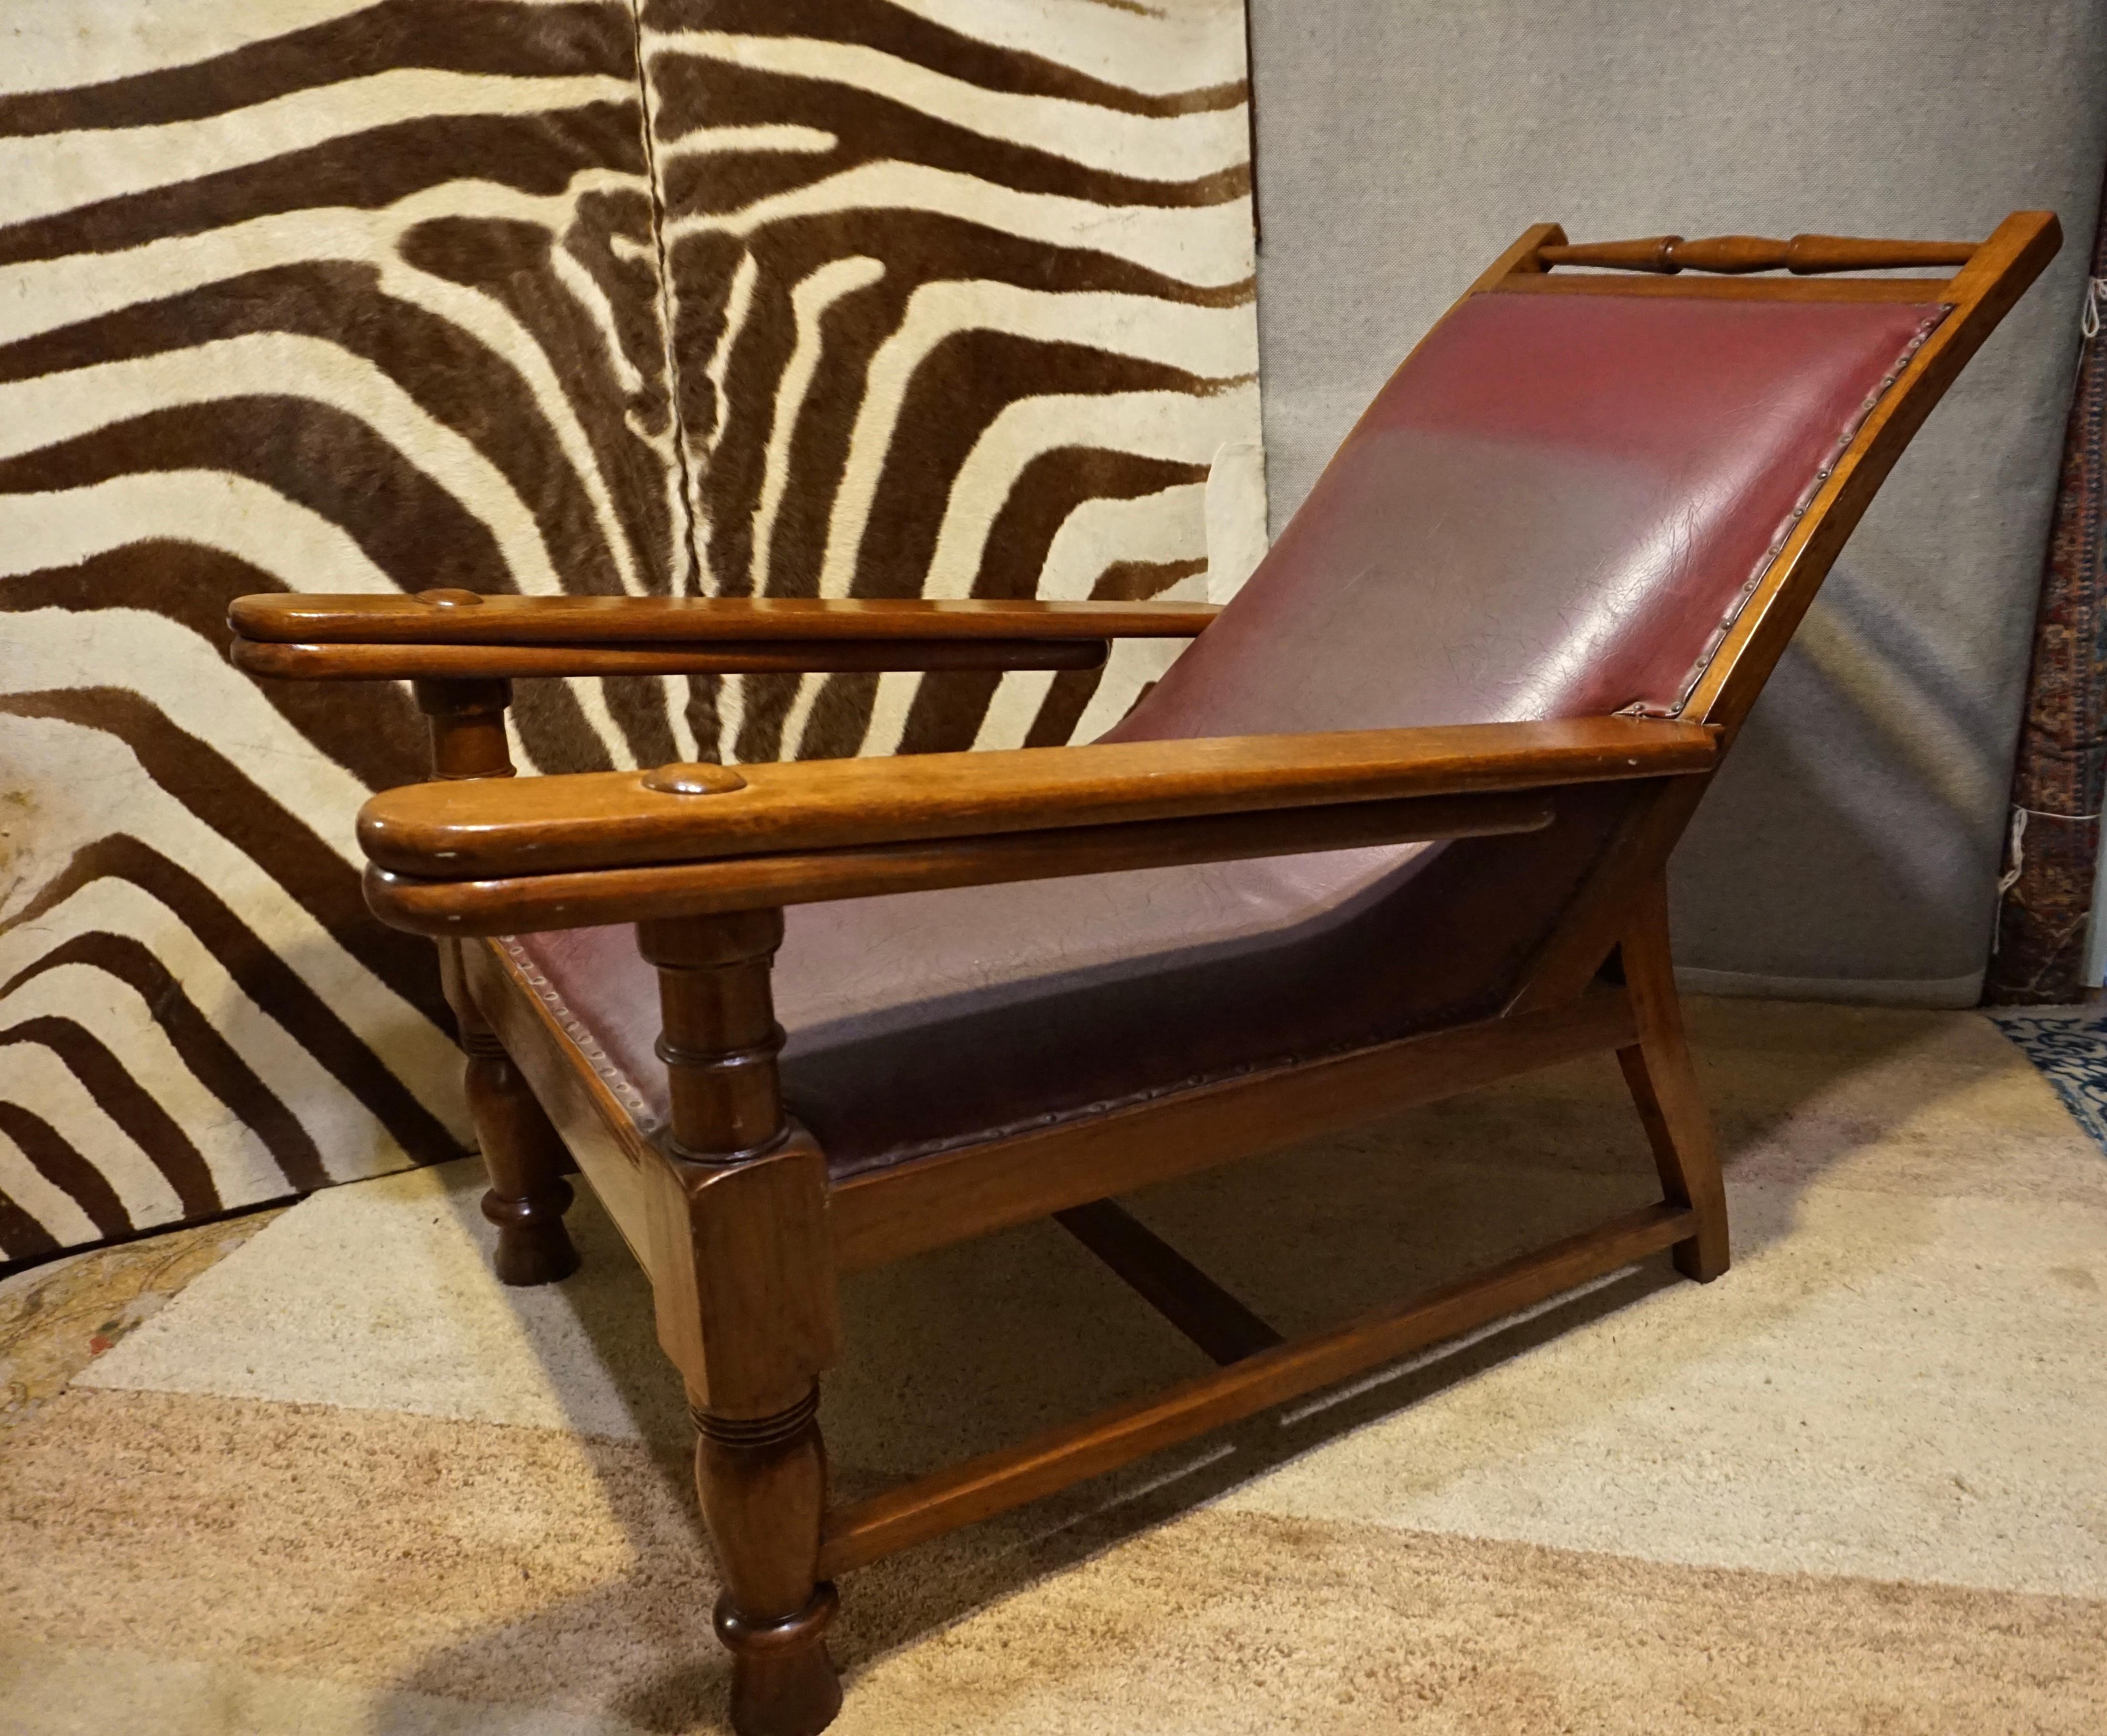 Circa 1890

Rare Teak and leather lounge chair that was formerly used in a Tea Estate in India. Hand made with pull out leaves that transform into leg rests and can be tucked back under the arms. Exceptionally conceived and with old leather sun